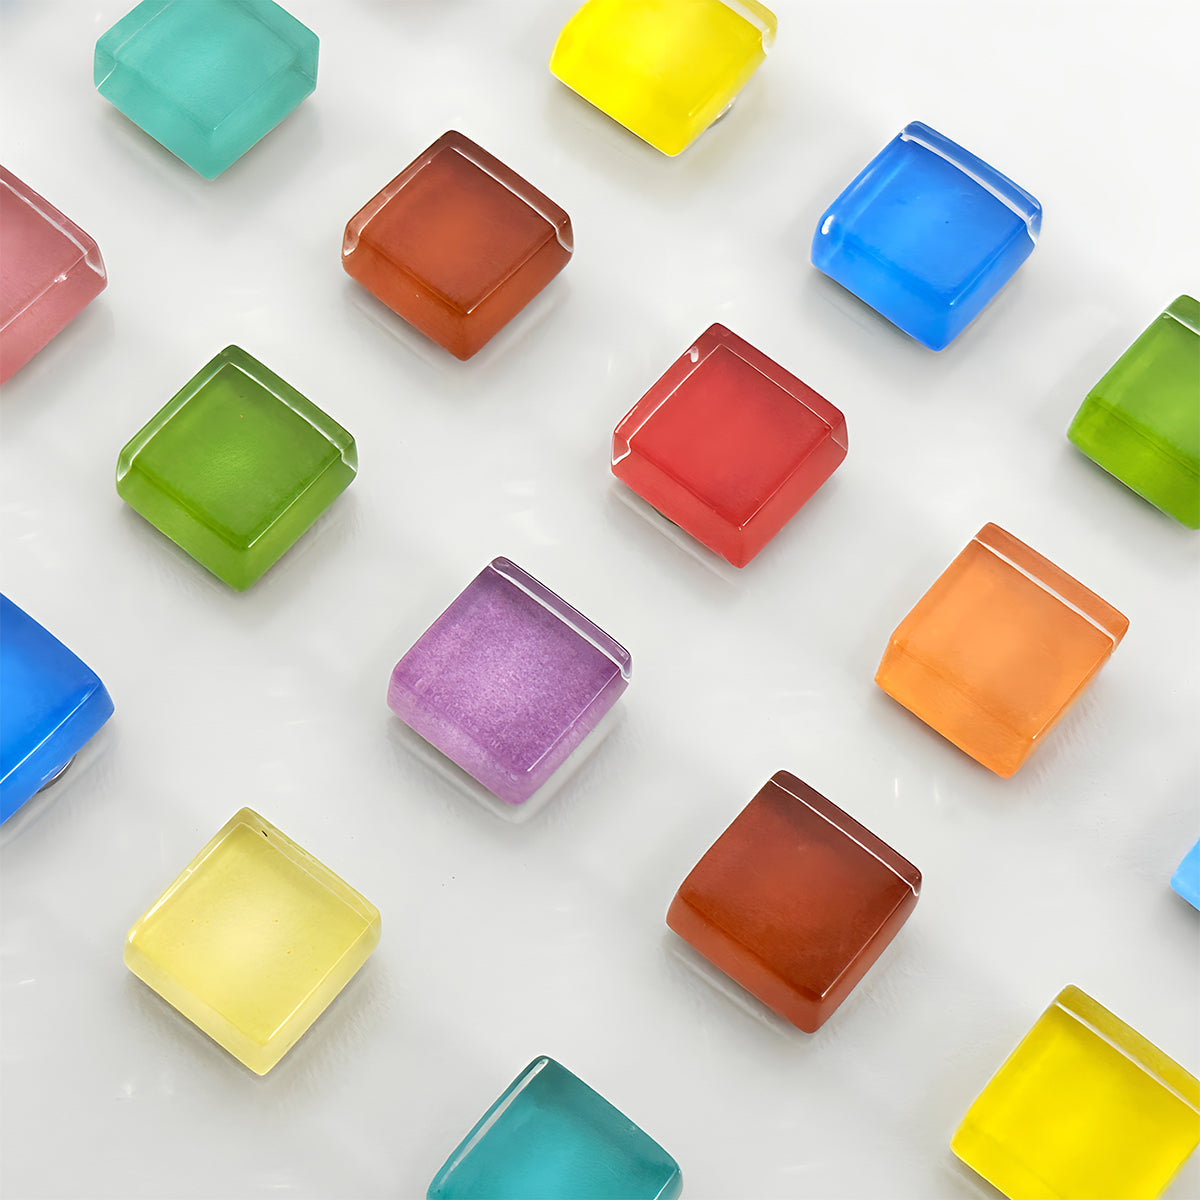 Wrapables Colorful Glass Cube Magnets, Refrigerator Magnets for Office Whiteboards, Cabinets, Lockers (Set of 24)